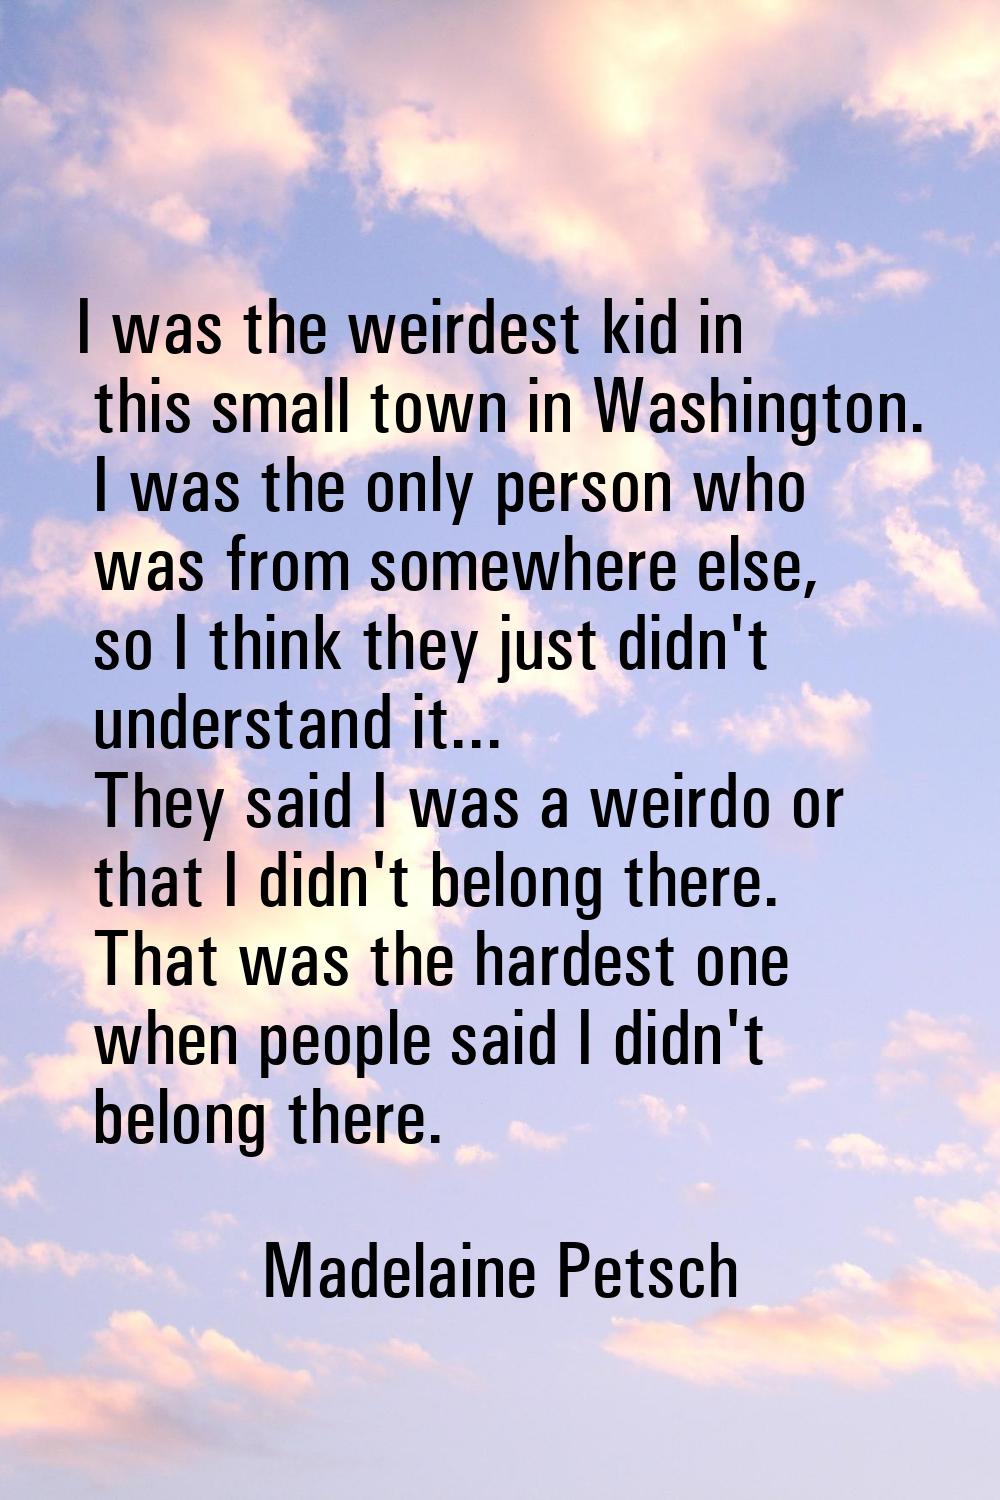 I was the weirdest kid in this small town in Washington. I was the only person who was from somewhe